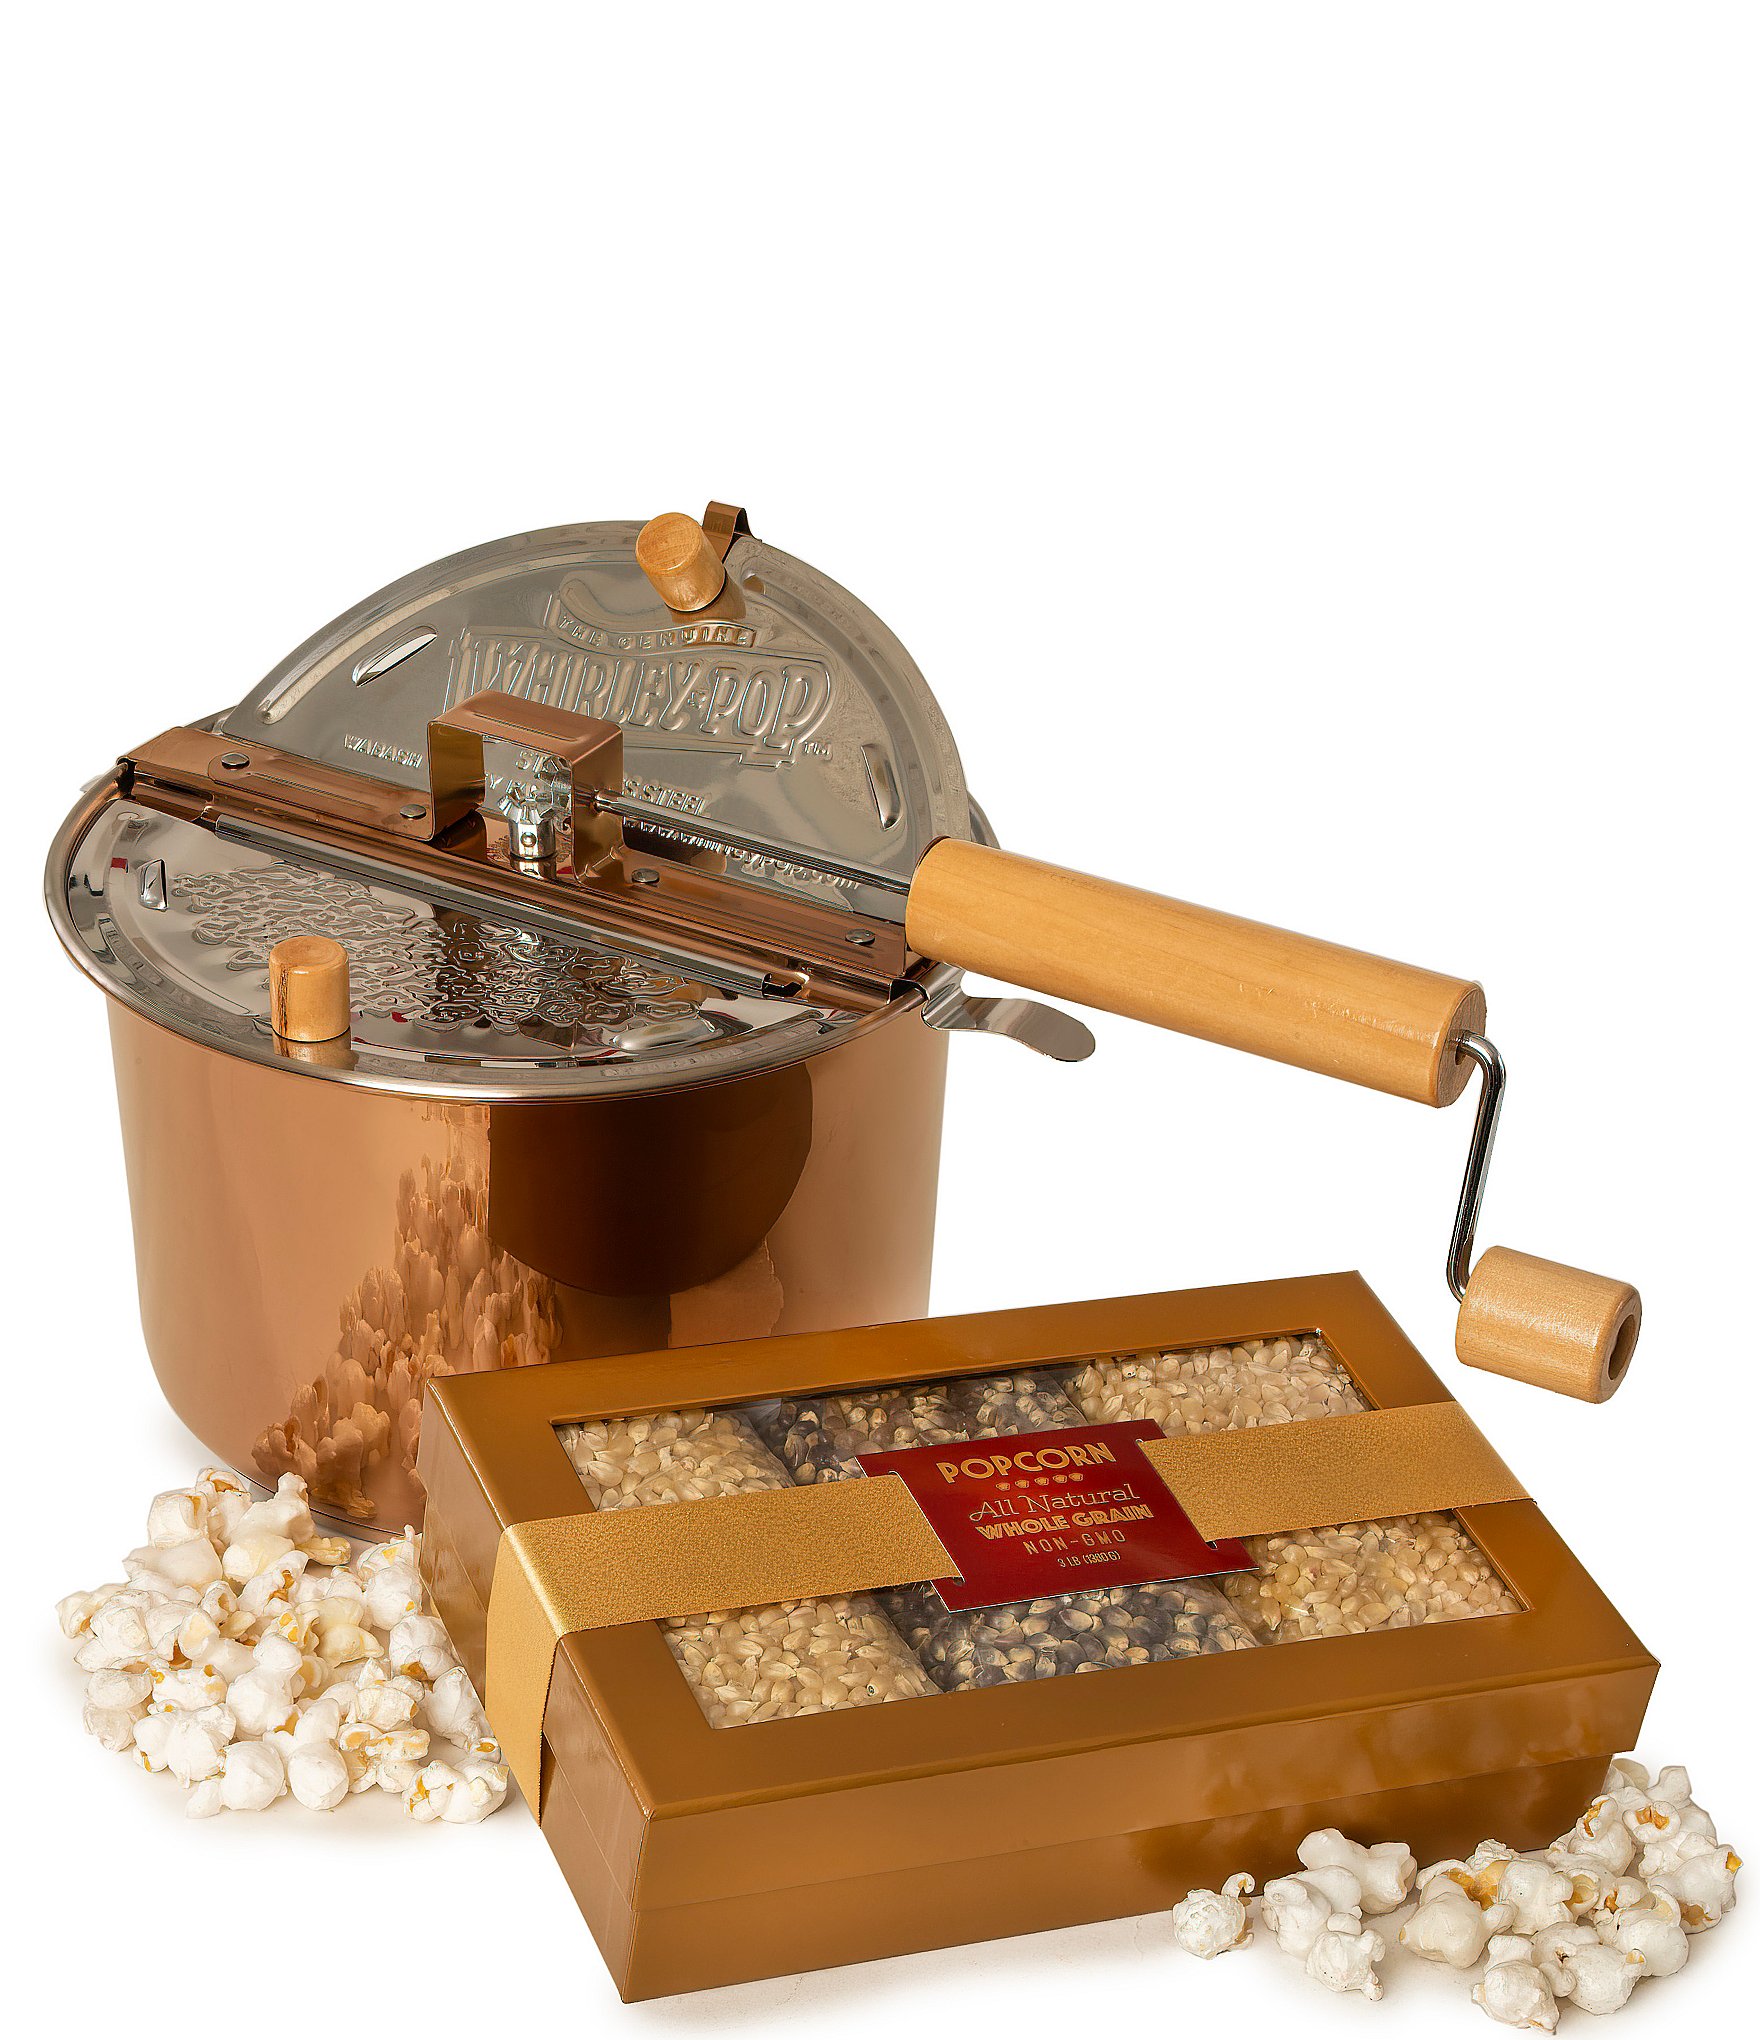 https://dimg.dillards.com/is/image/DillardsZoom/zoom/wabash-valley-farms-luxury-snacking-popcorn--copper-plated-stainless-steel-whirley-pop-popcorn-maker-gift-set/00000000_zi_20436063.jpg